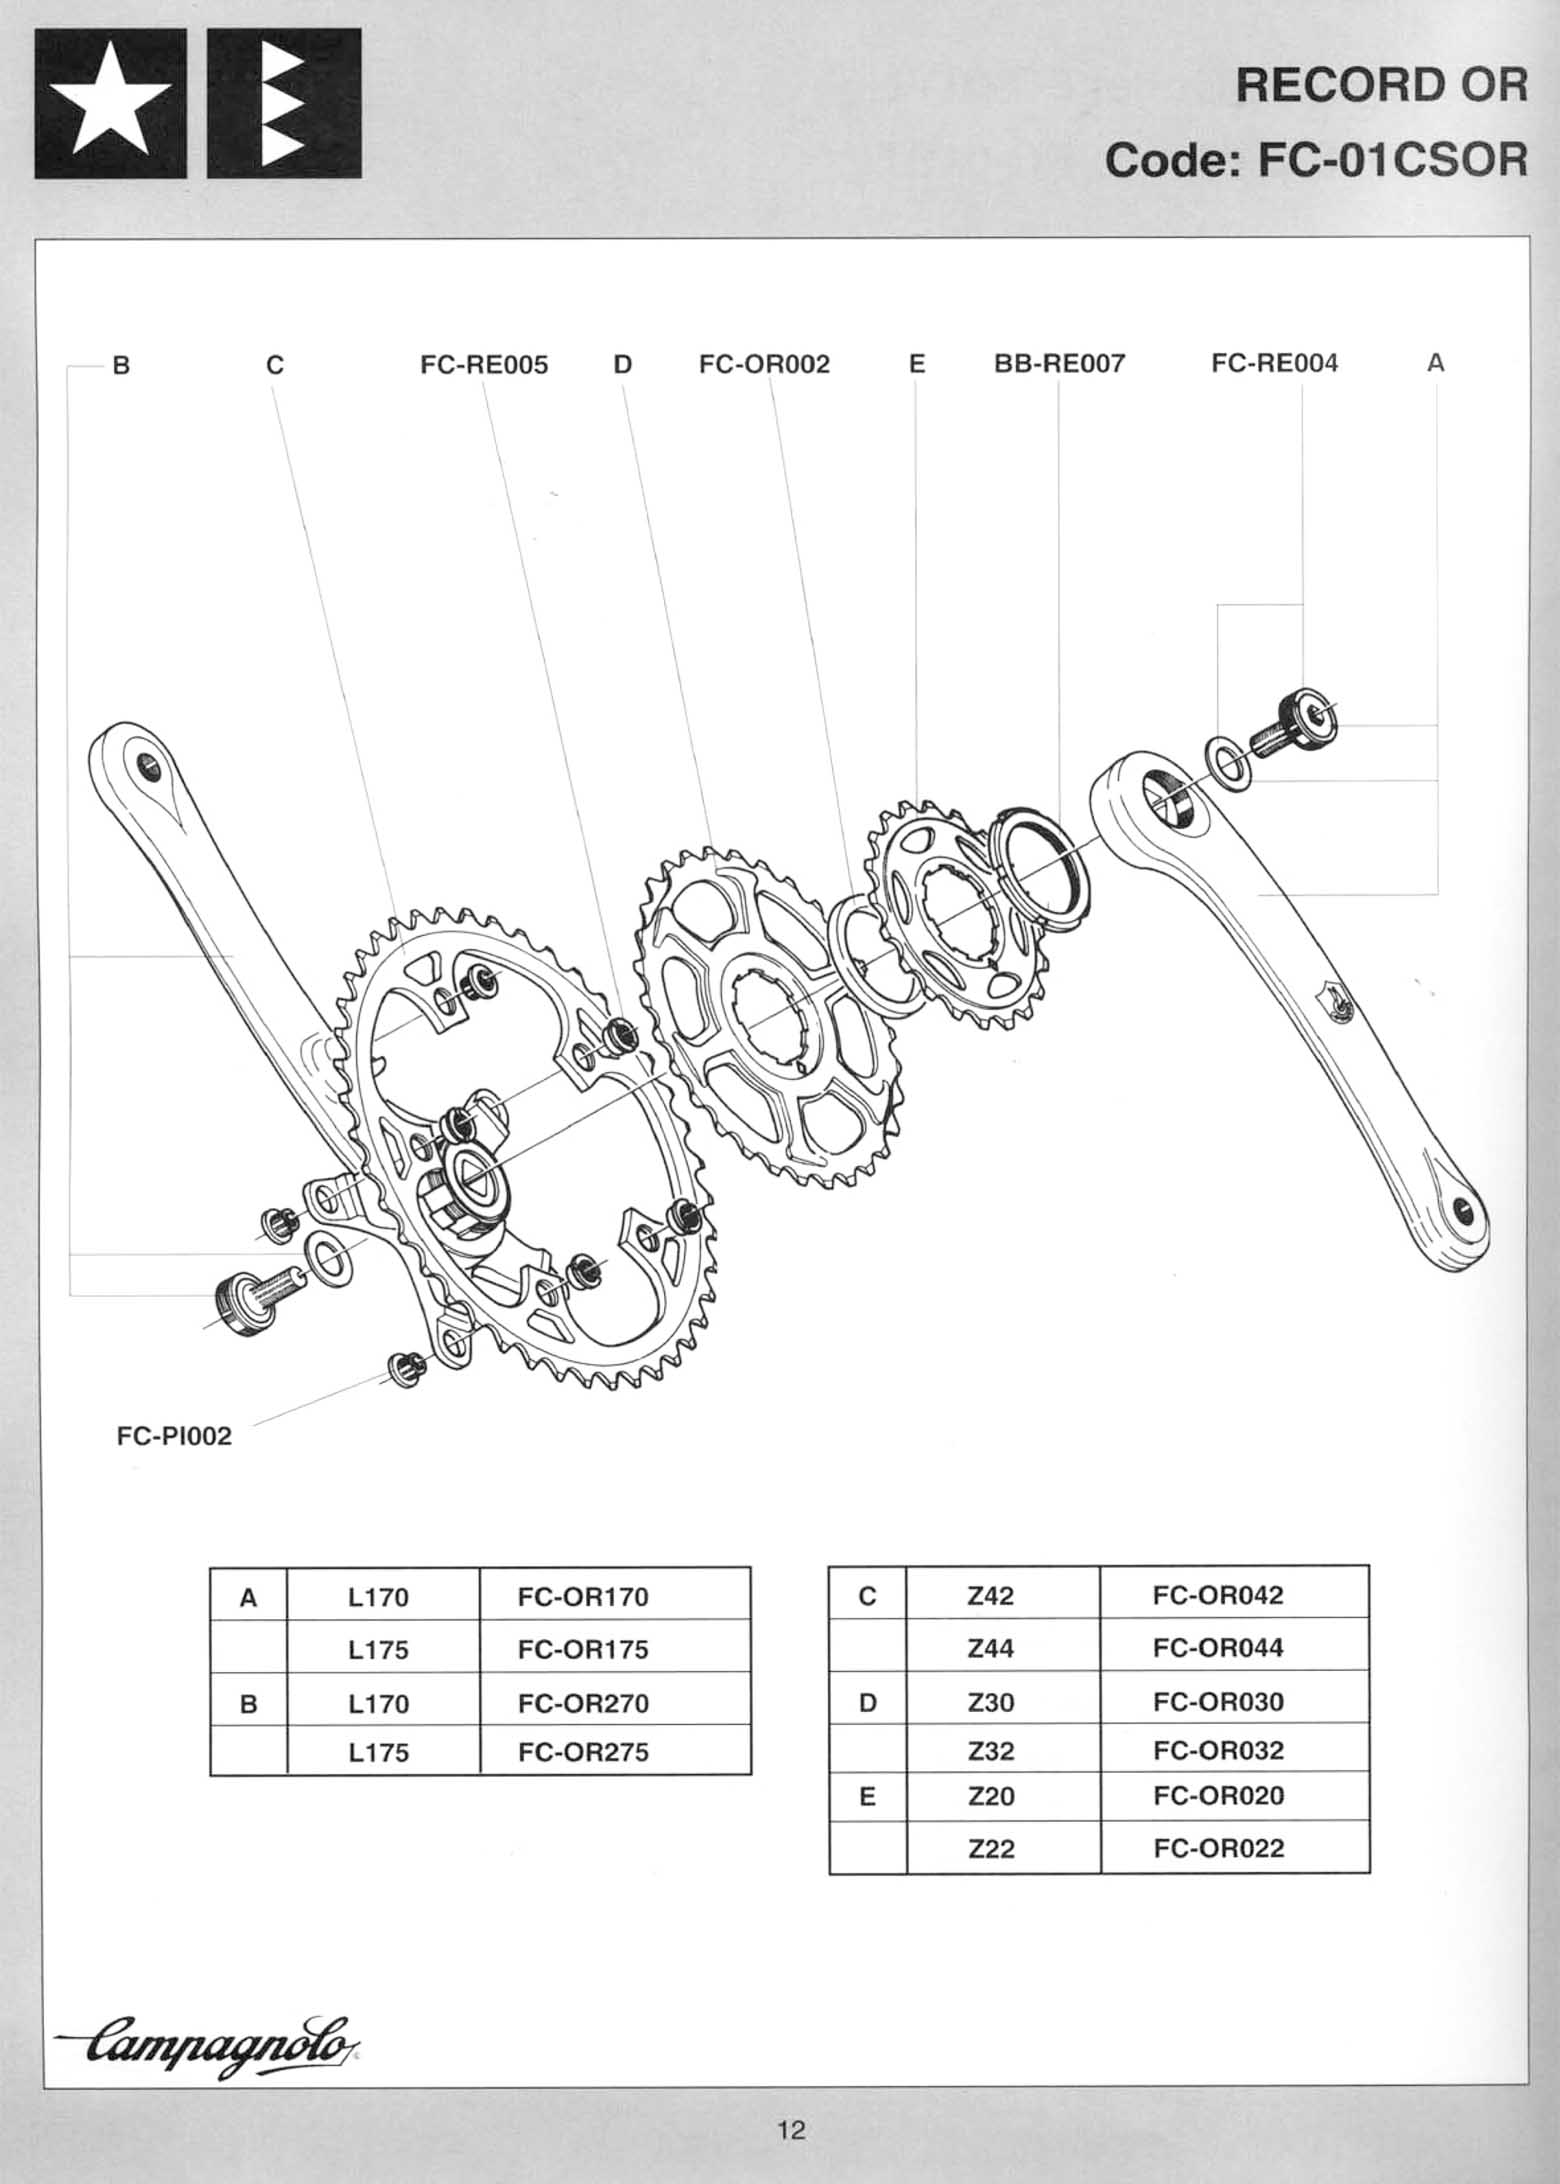 Campagnolo Spare Parts Catalogue - 1994 Product Range page 12 main image